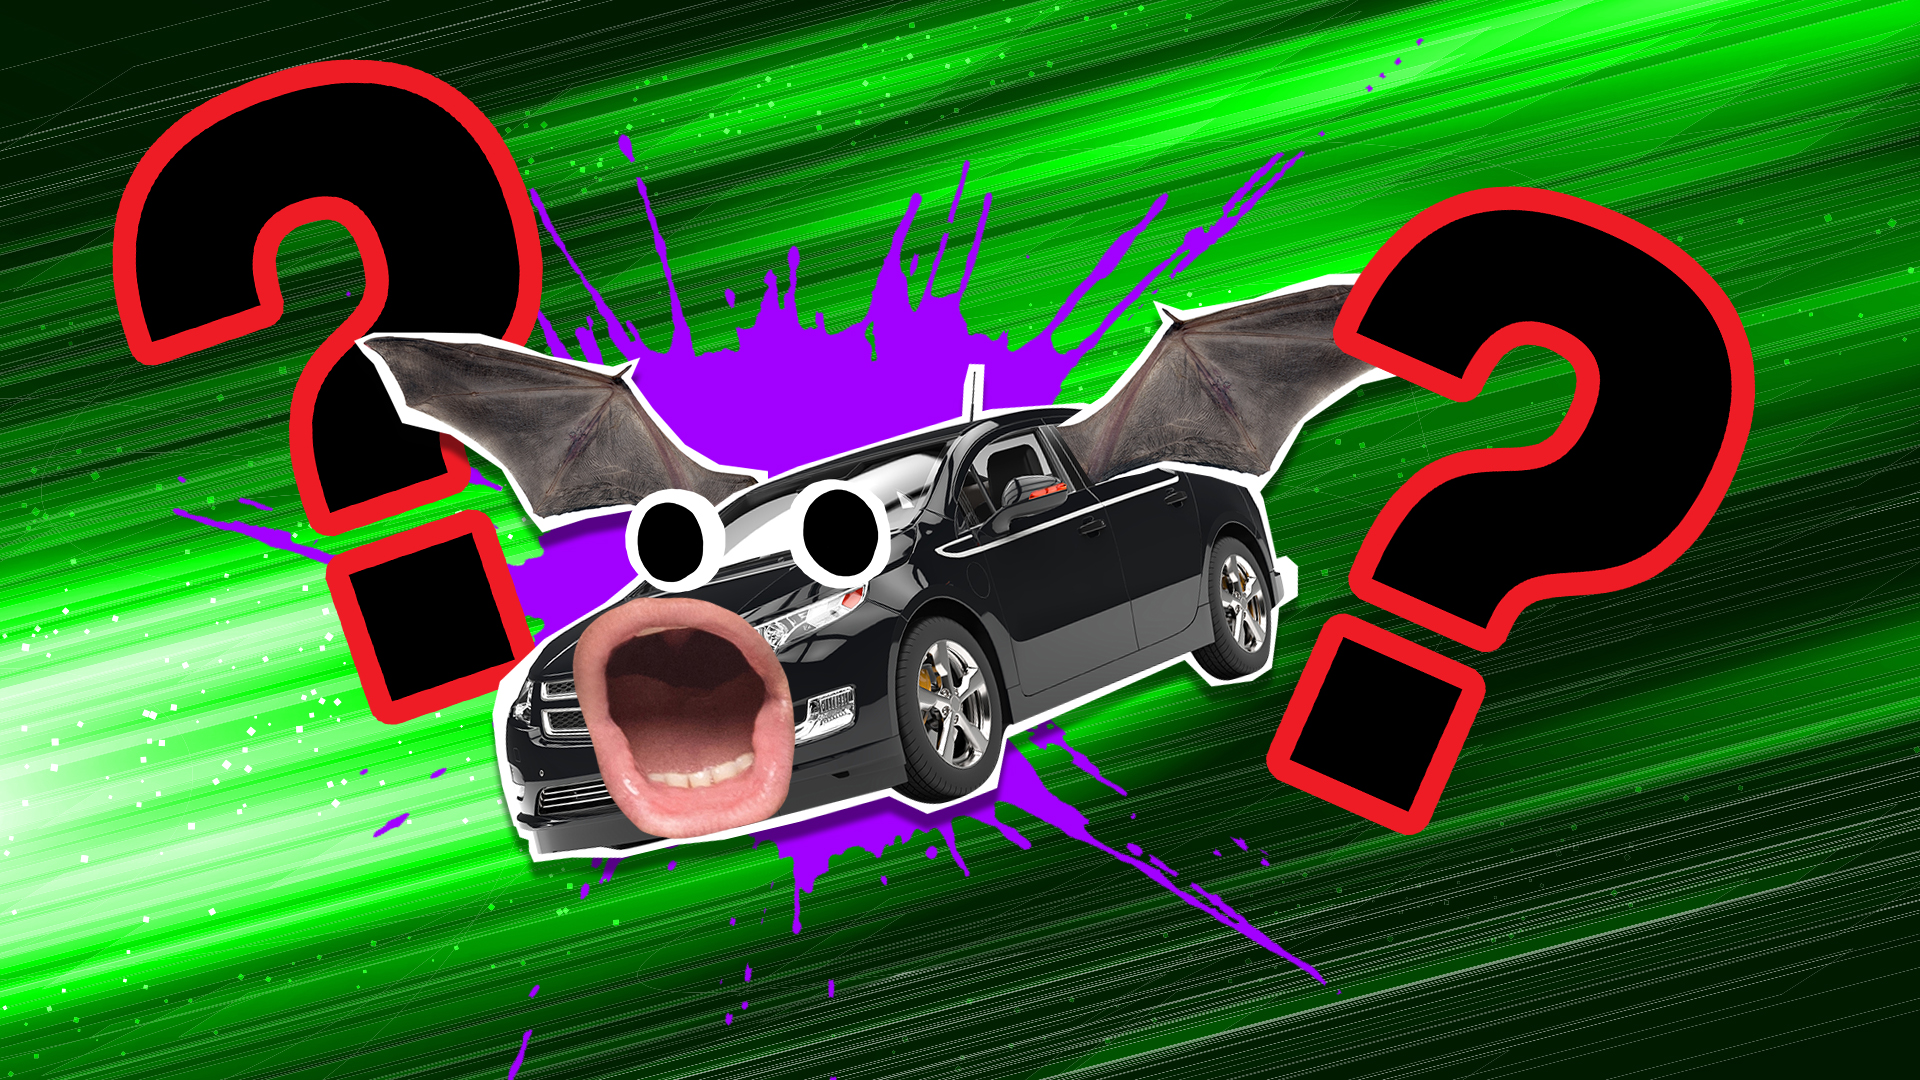 A car with bat wings